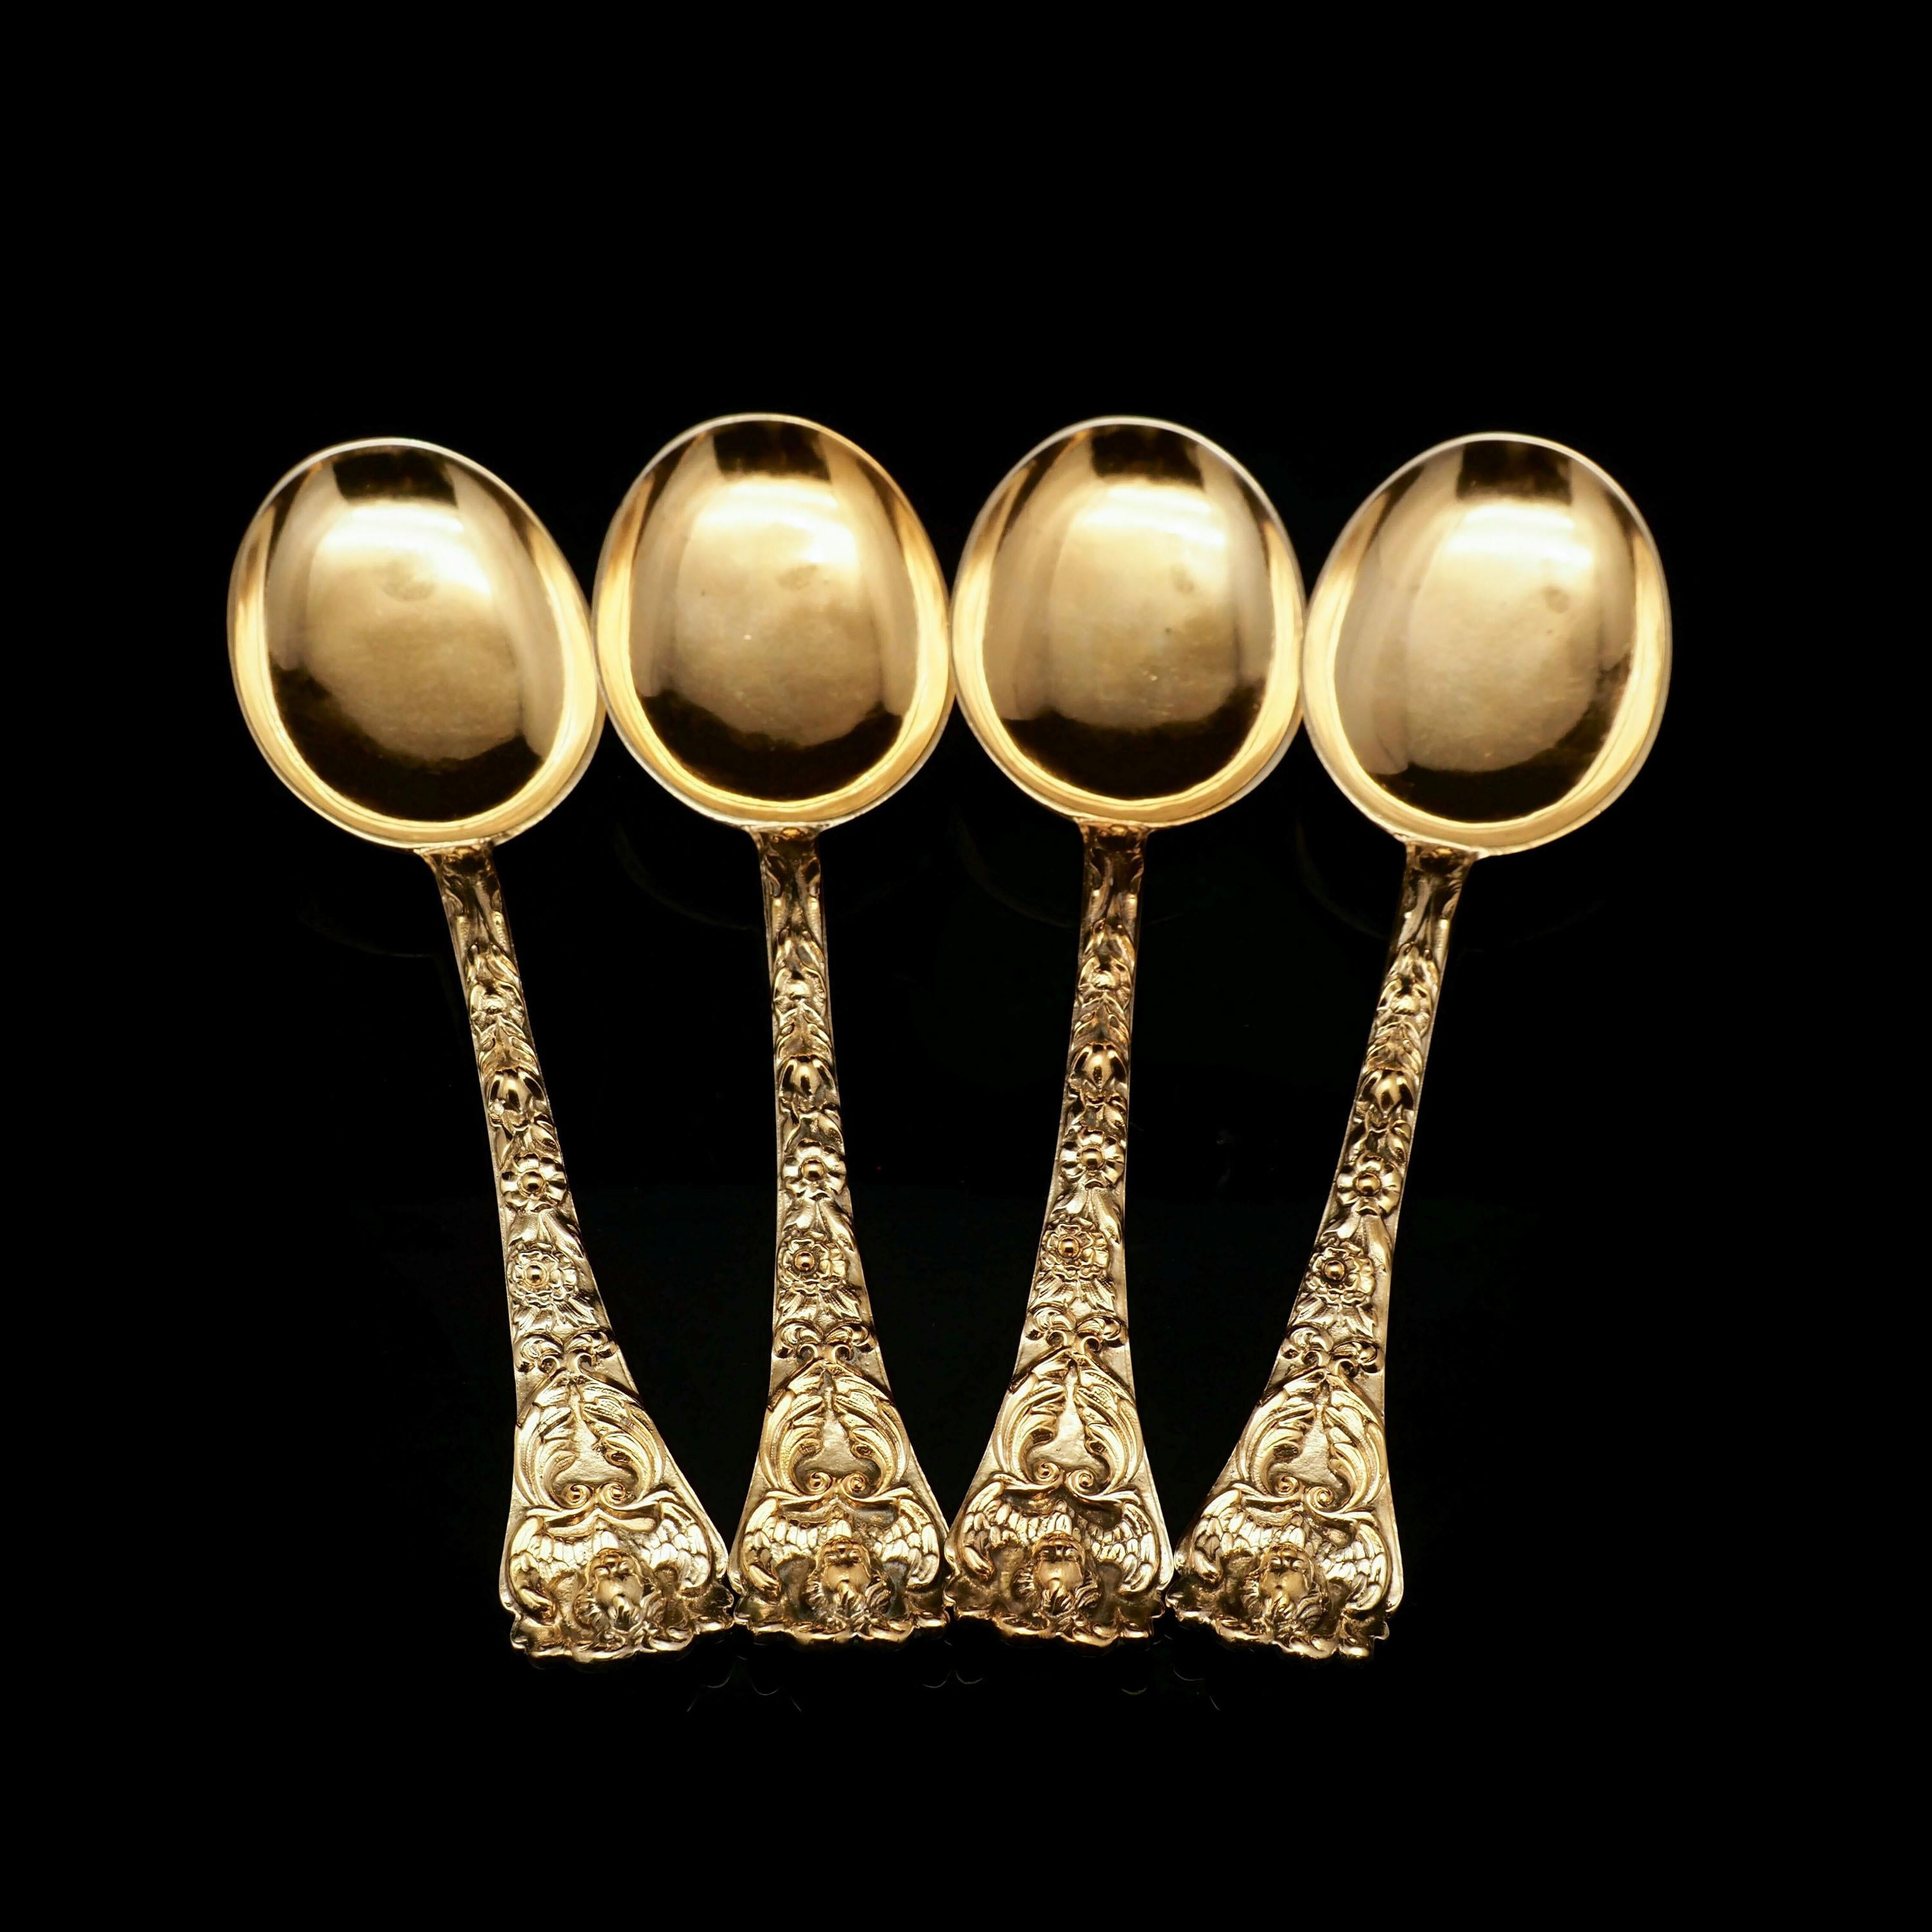 Antique Set of 4 Solid Silver Gilt Spoons Highly Embossed, Henry William Curry For Sale 7